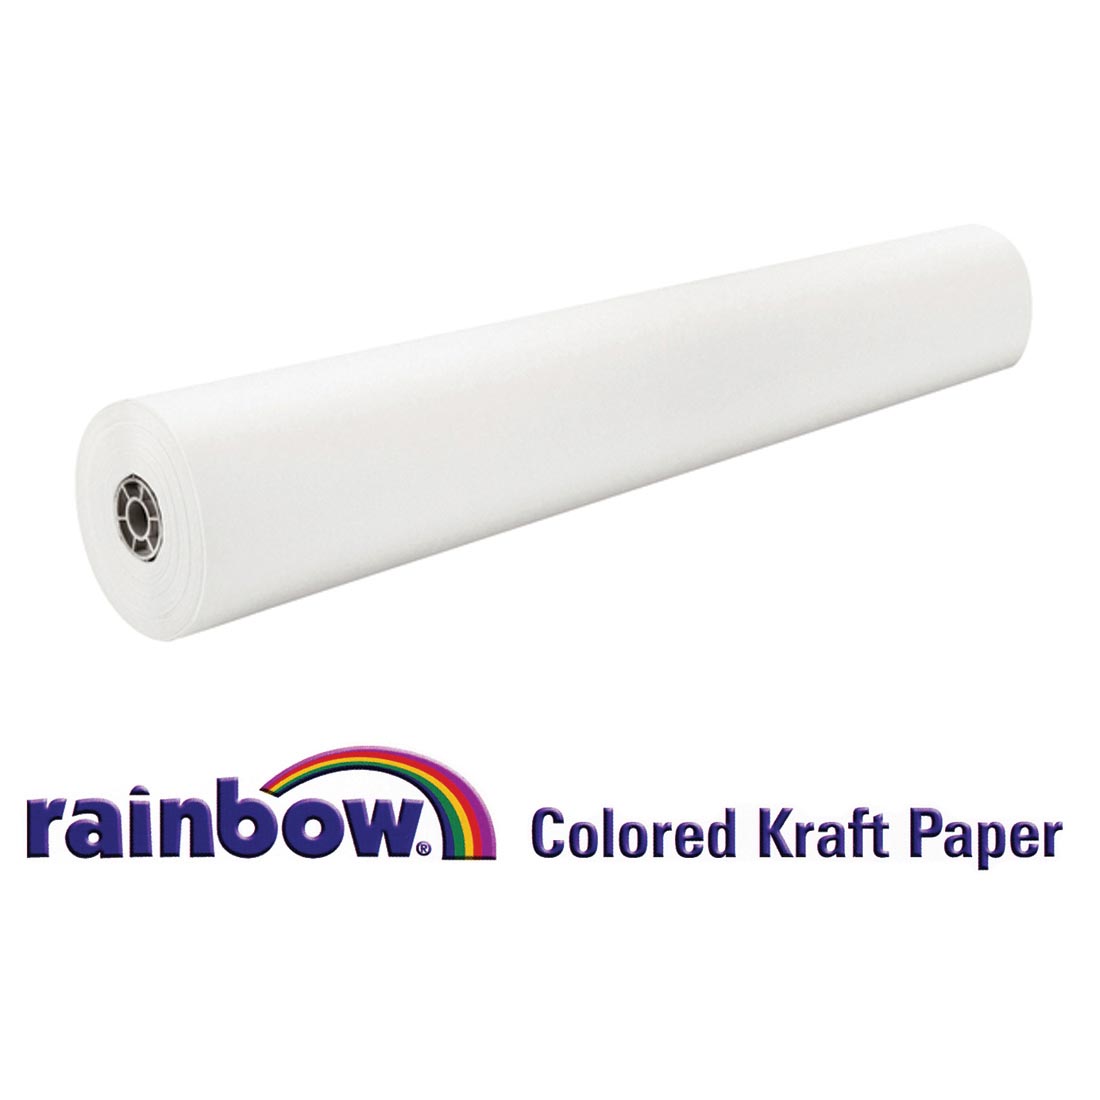 Roll of White Paper with text Rainbow Colored Kraft Paper